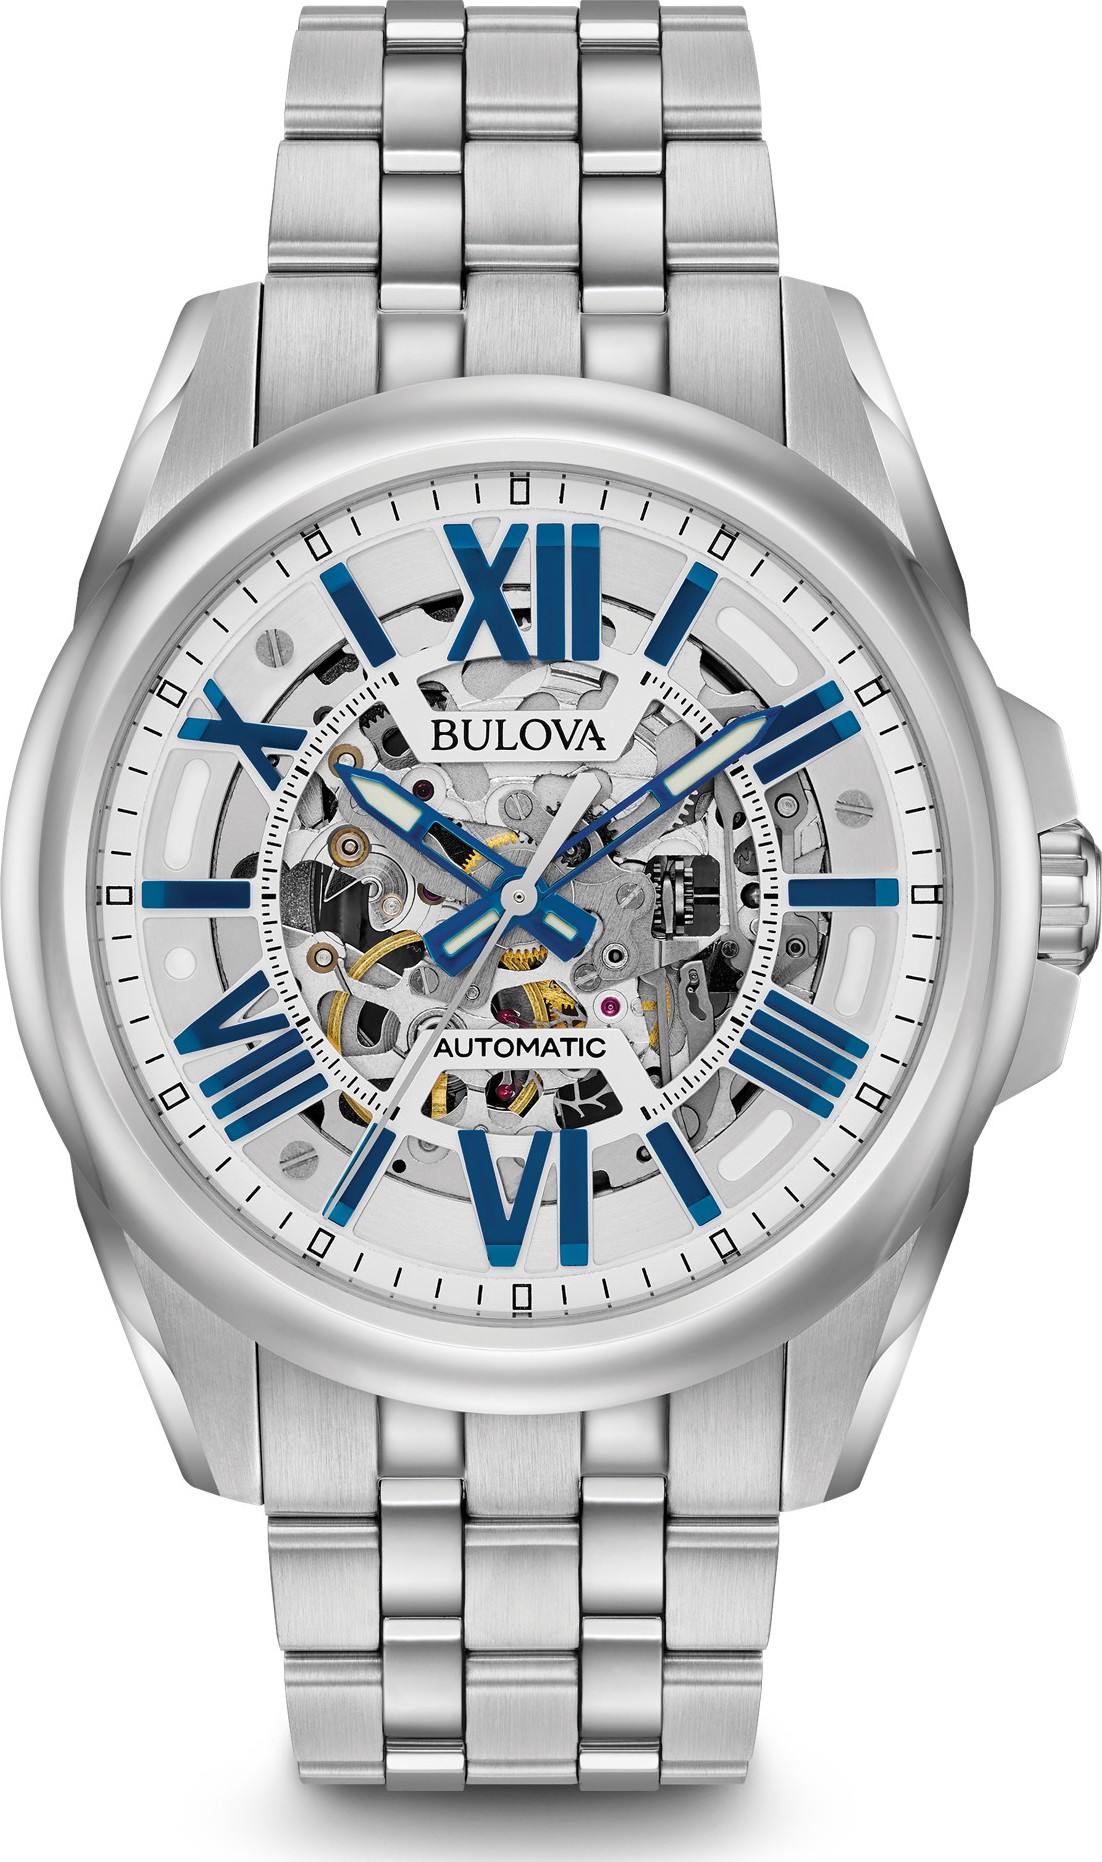 old bulova mens watches worth anything